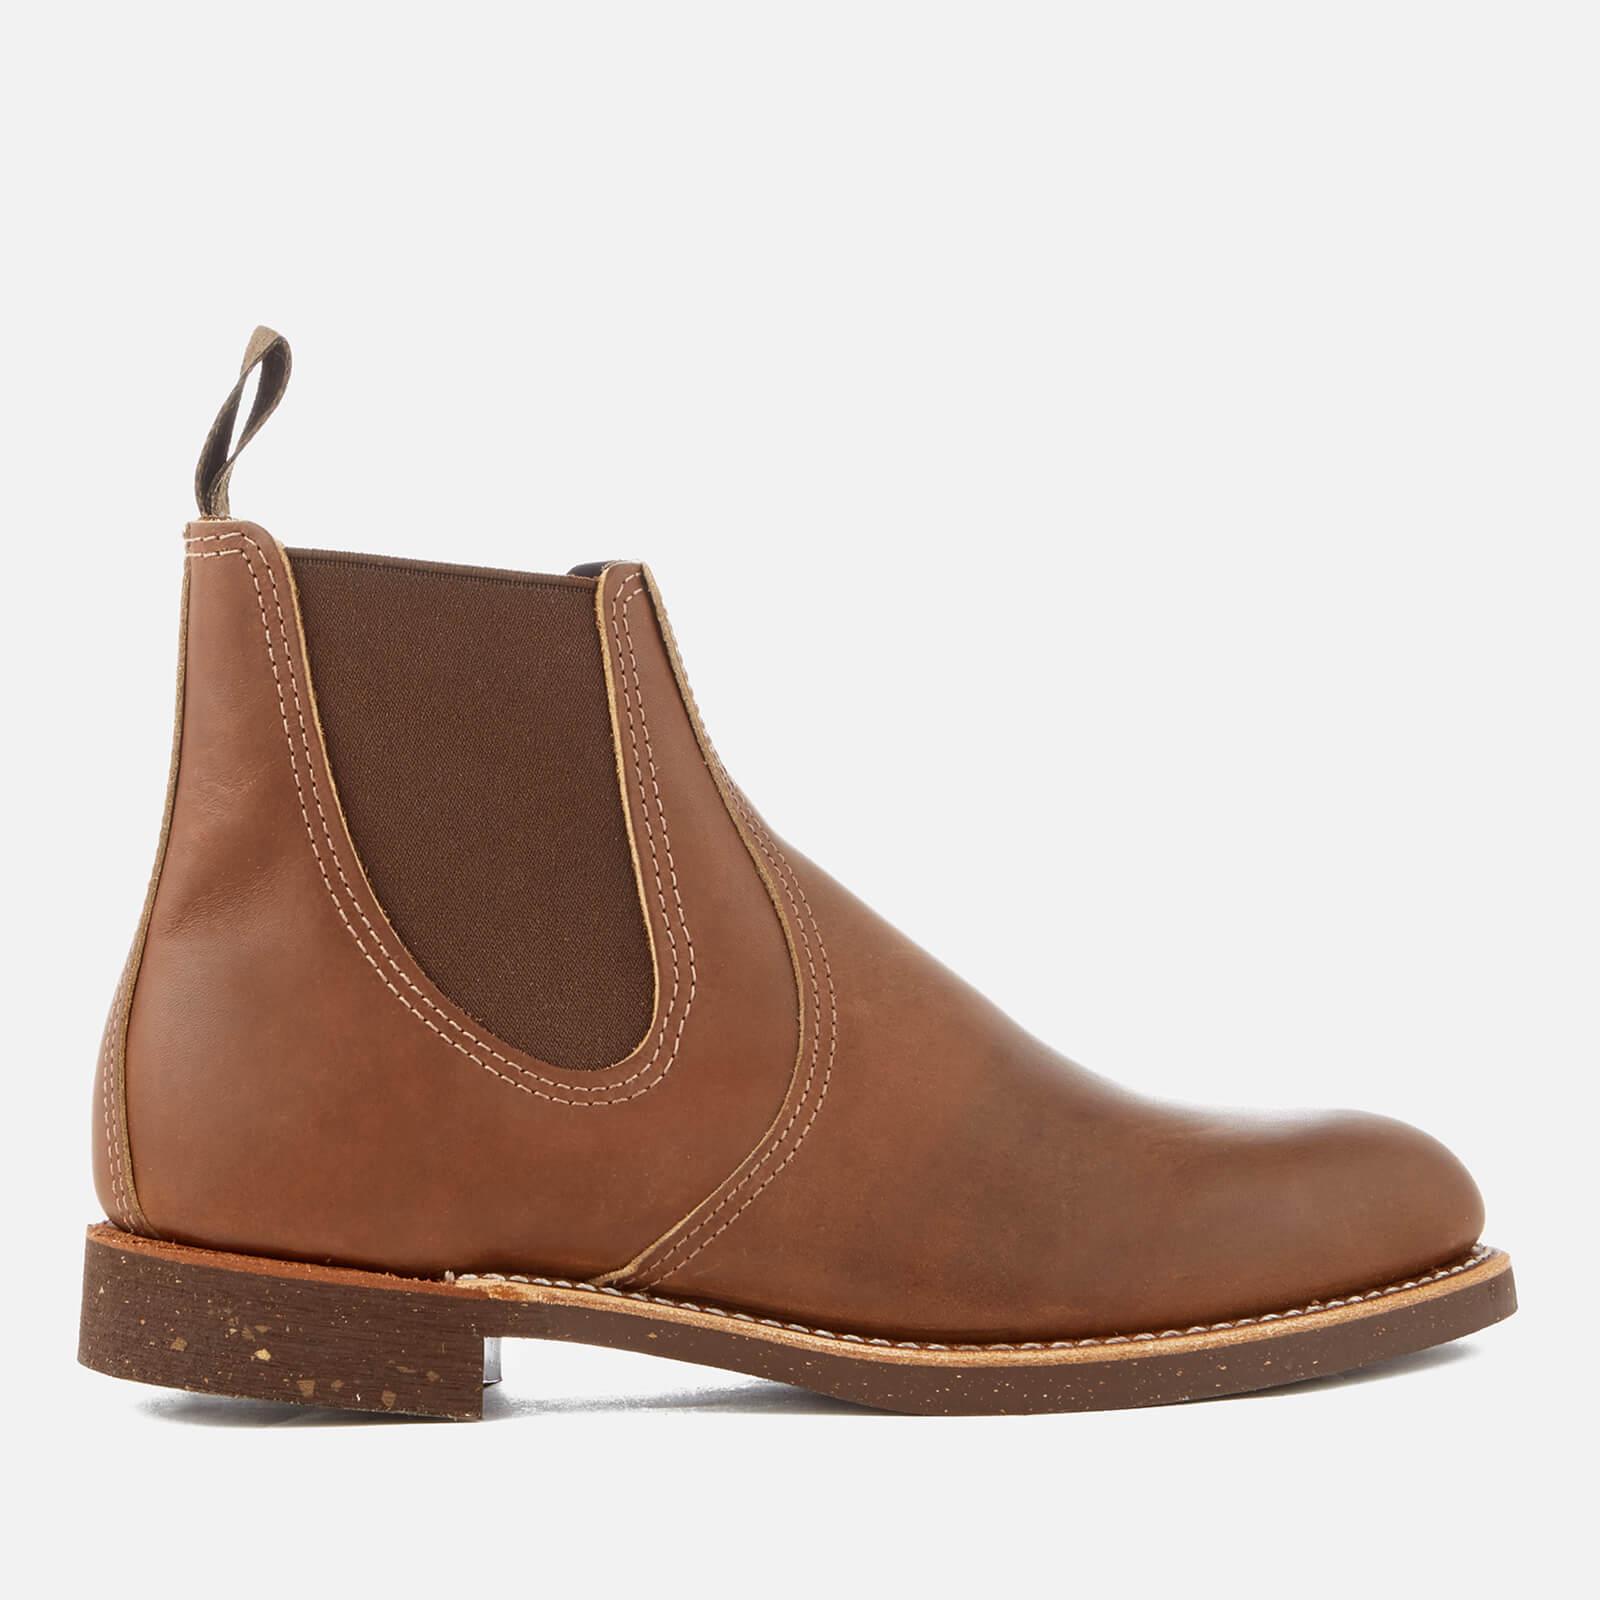 Lyst - Red Wing Chelsea Rancher Leather Boots in Brown for Men - Save 49%